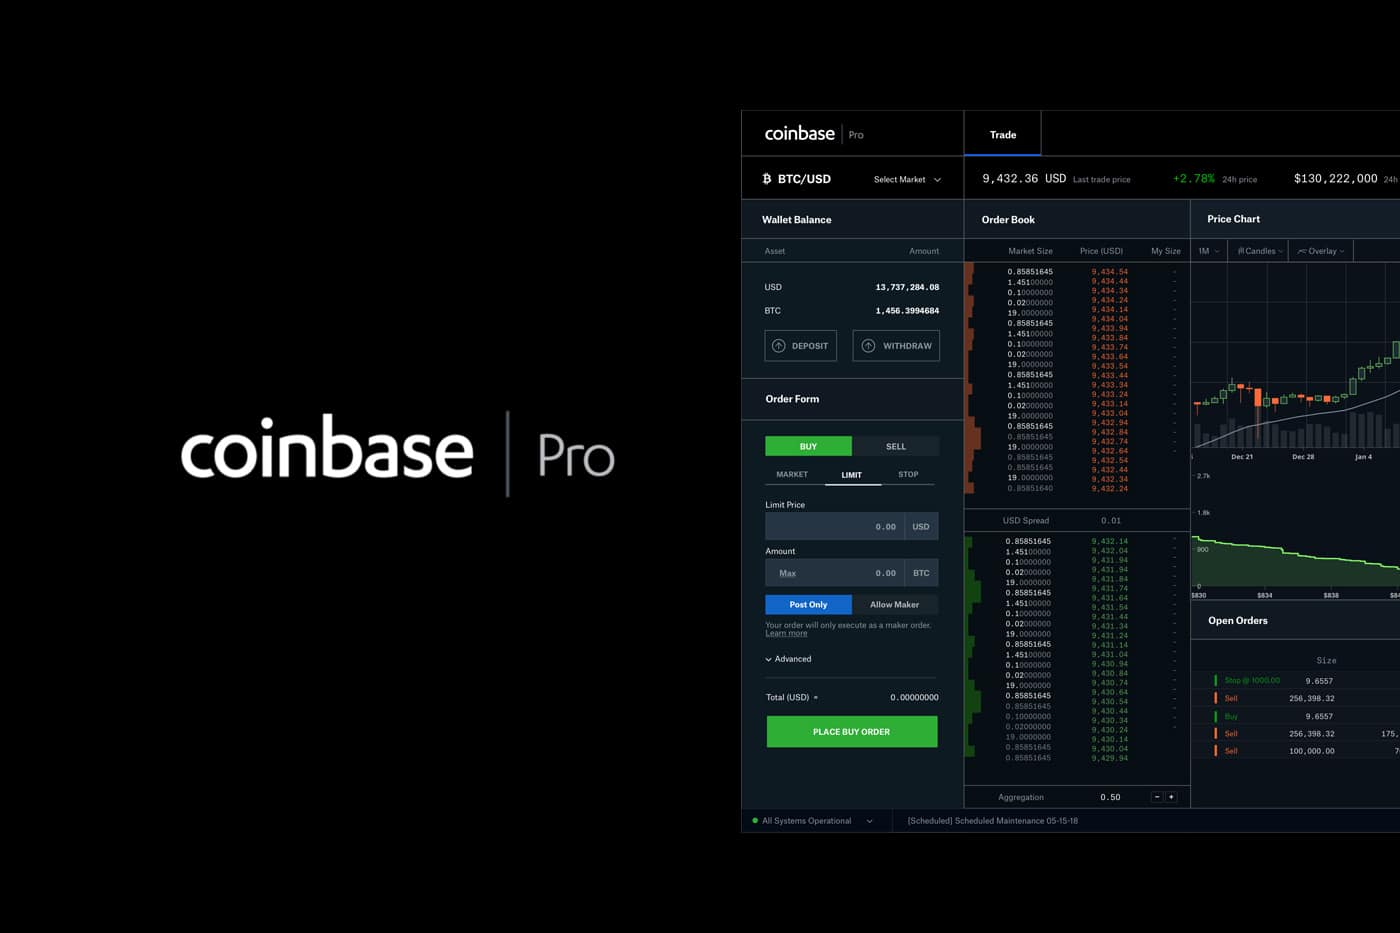 How to stake ethereum coinbase pro